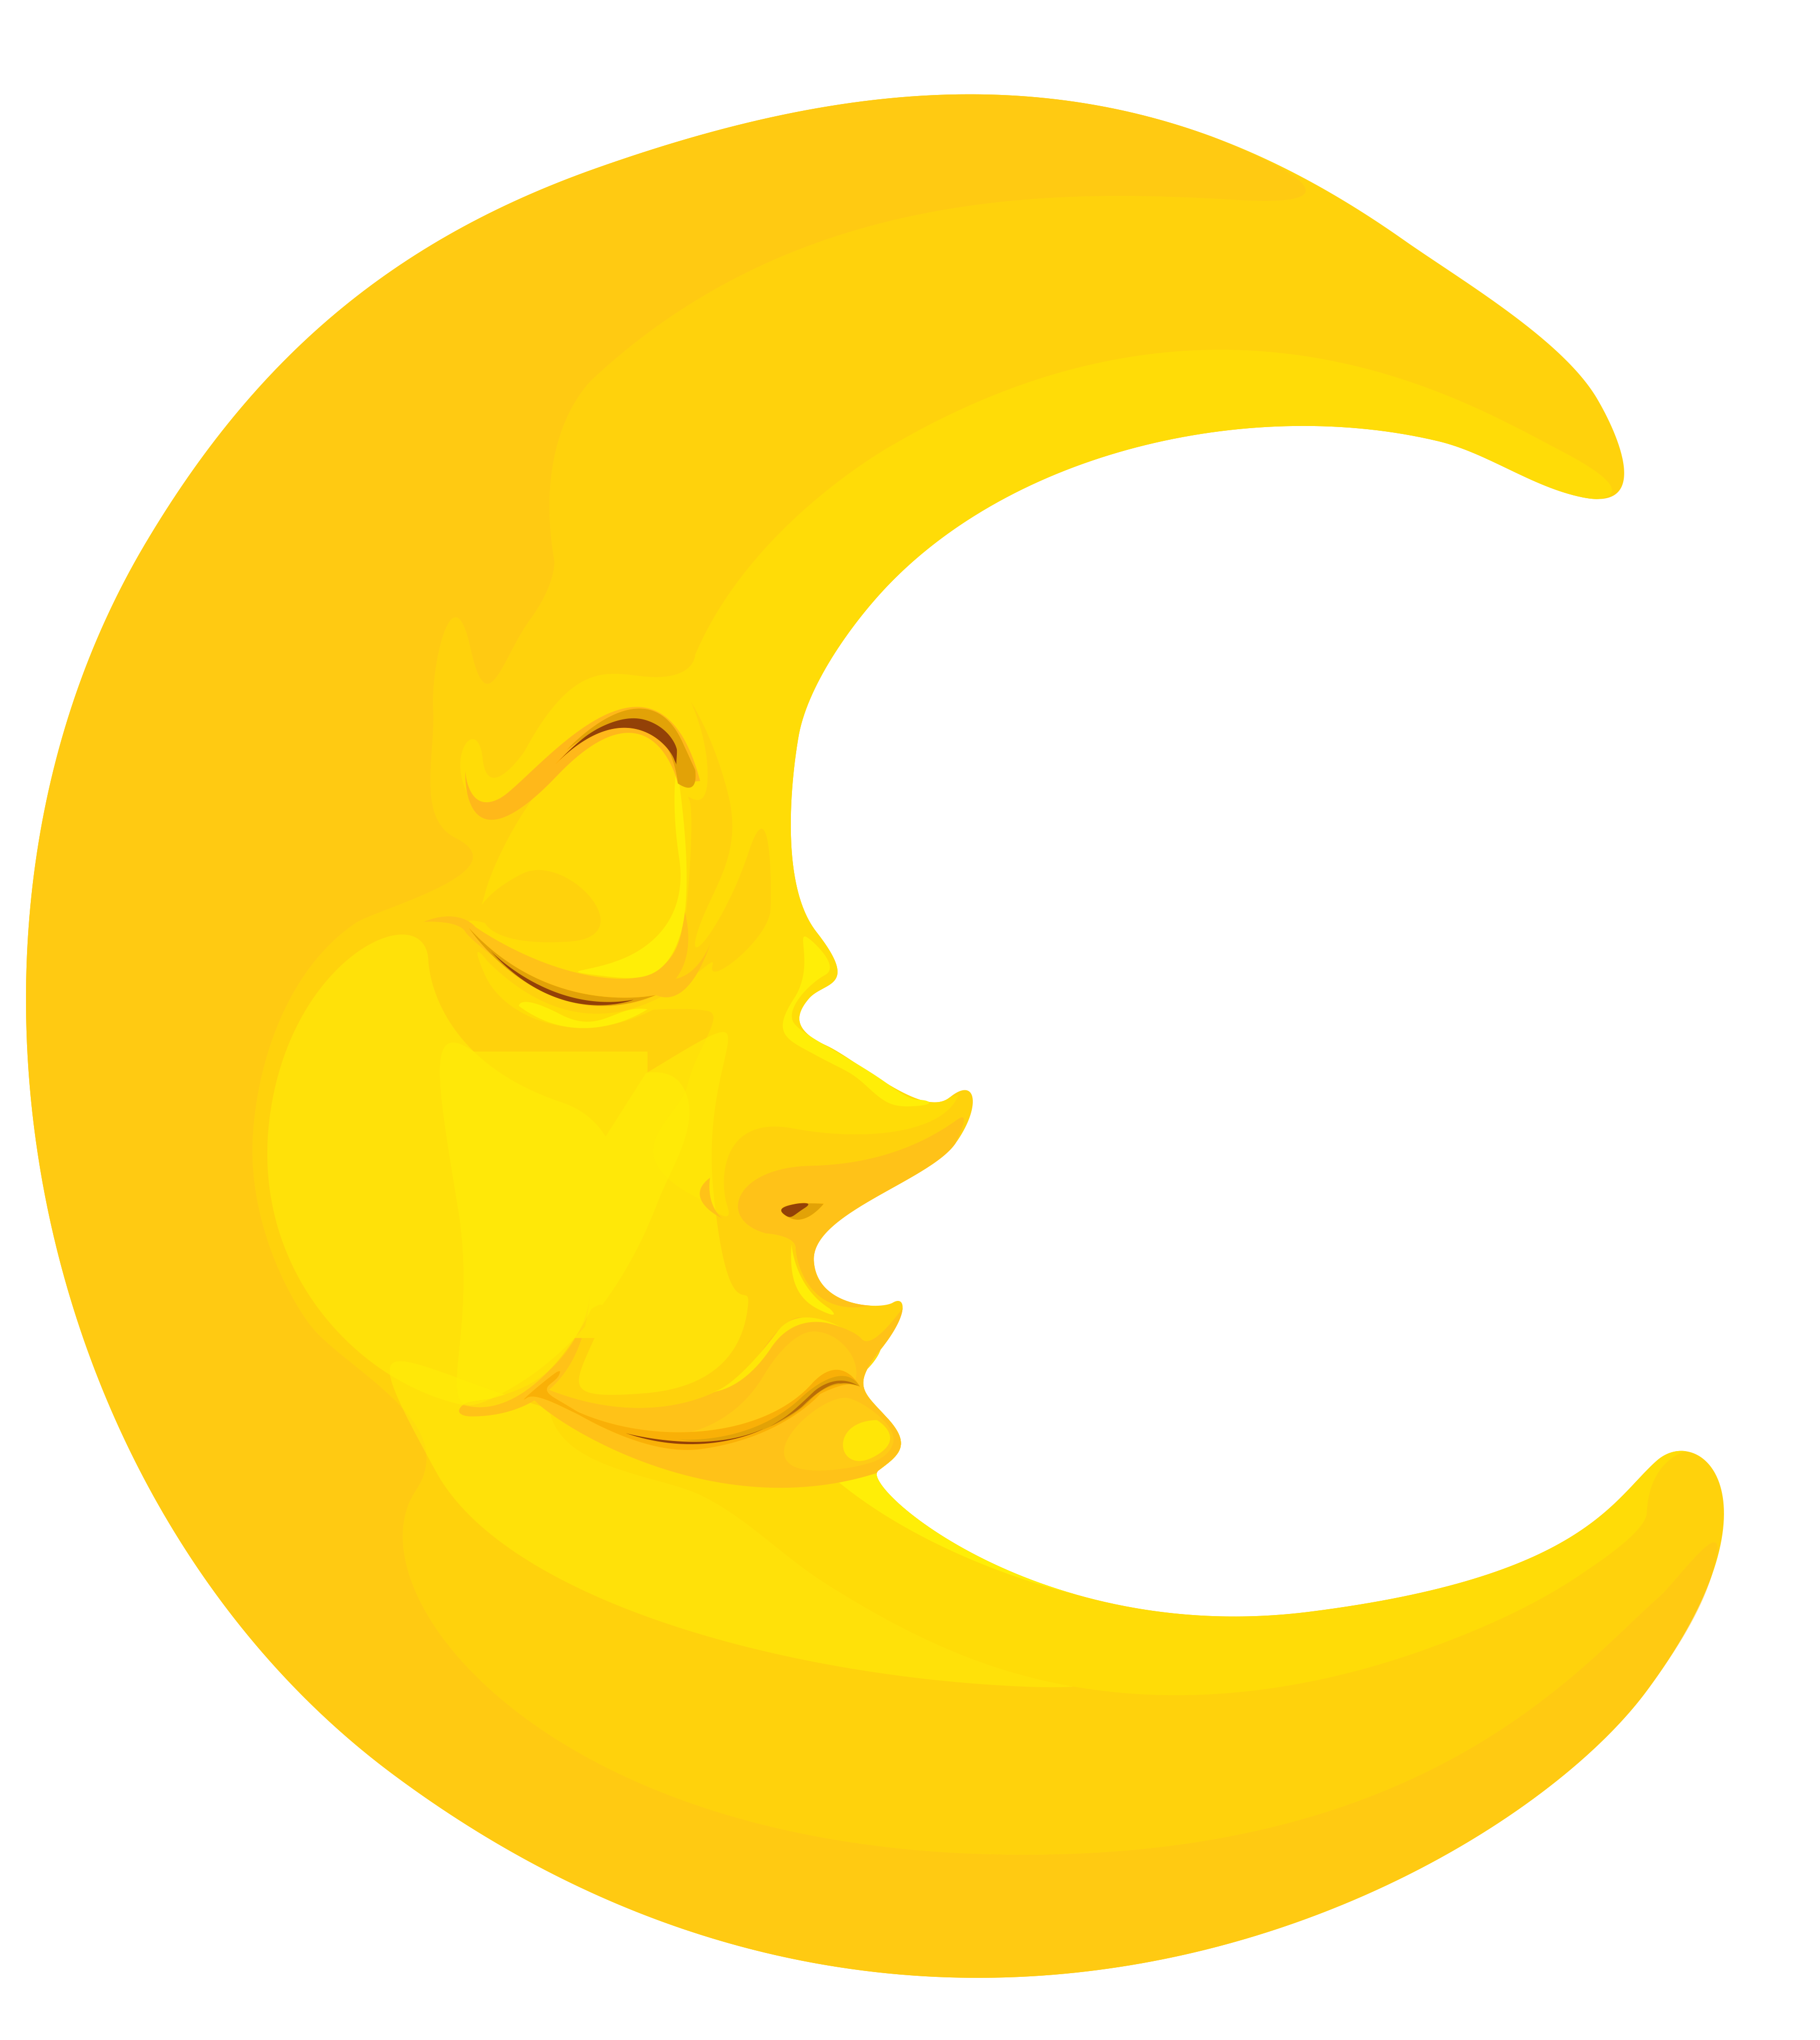 Moon Clip Art Free Images - Free Clipart Images